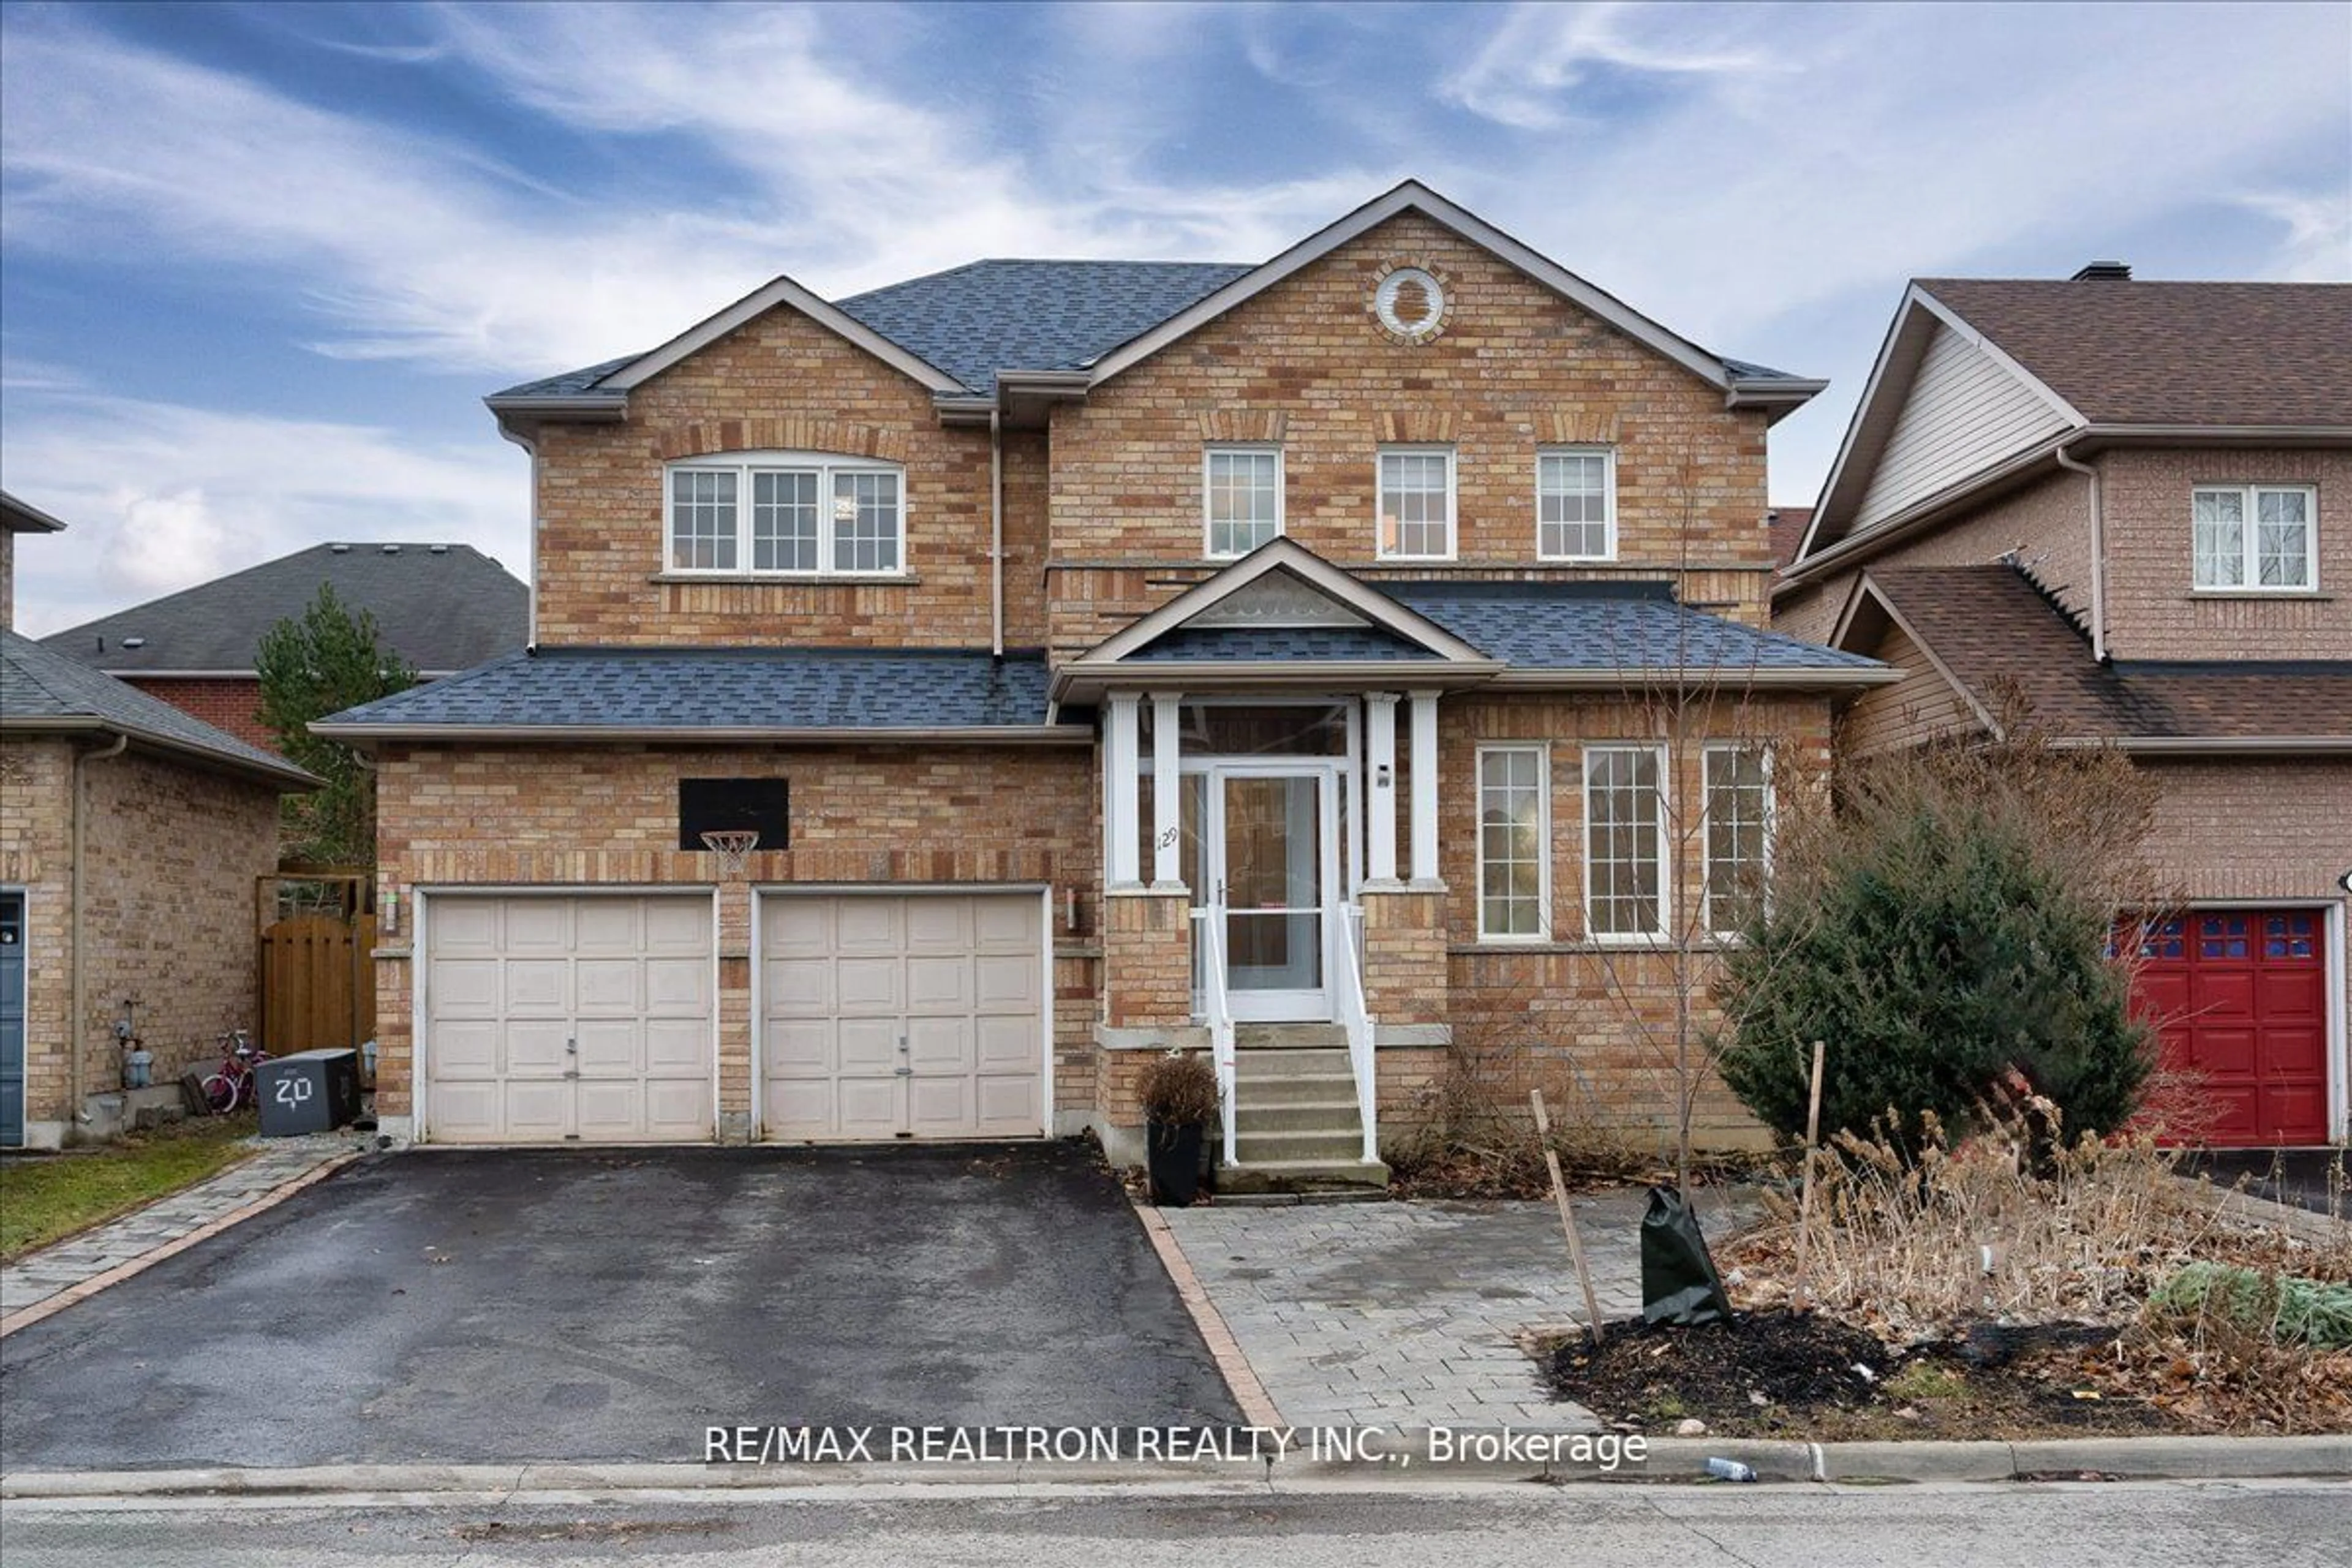 Home with brick exterior material for 129 Flagstone Way, Newmarket Ontario L3X 2Z8